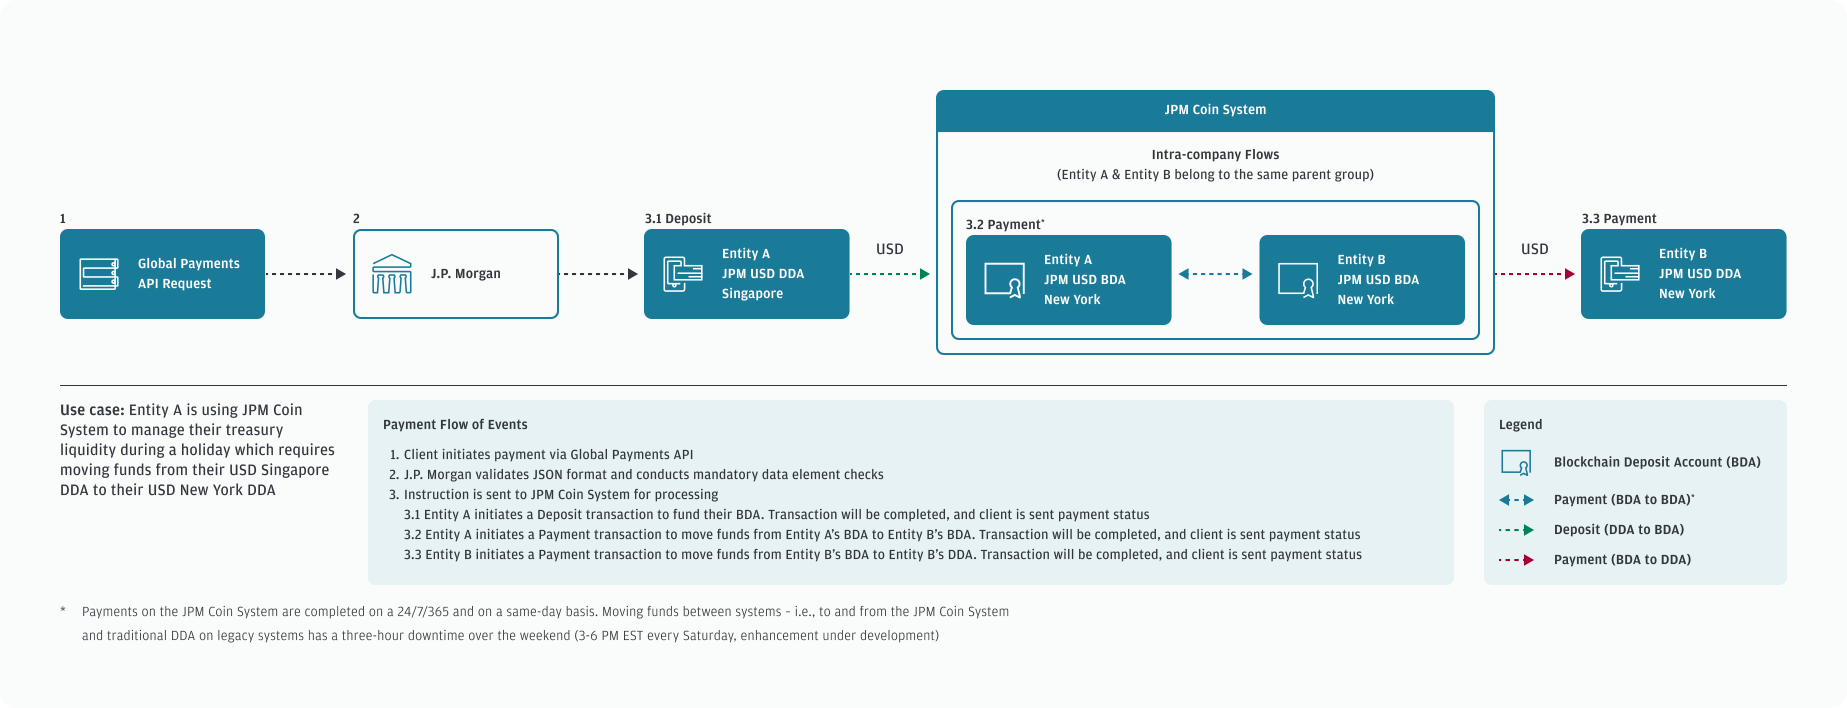 Flow of events for intra-company payments